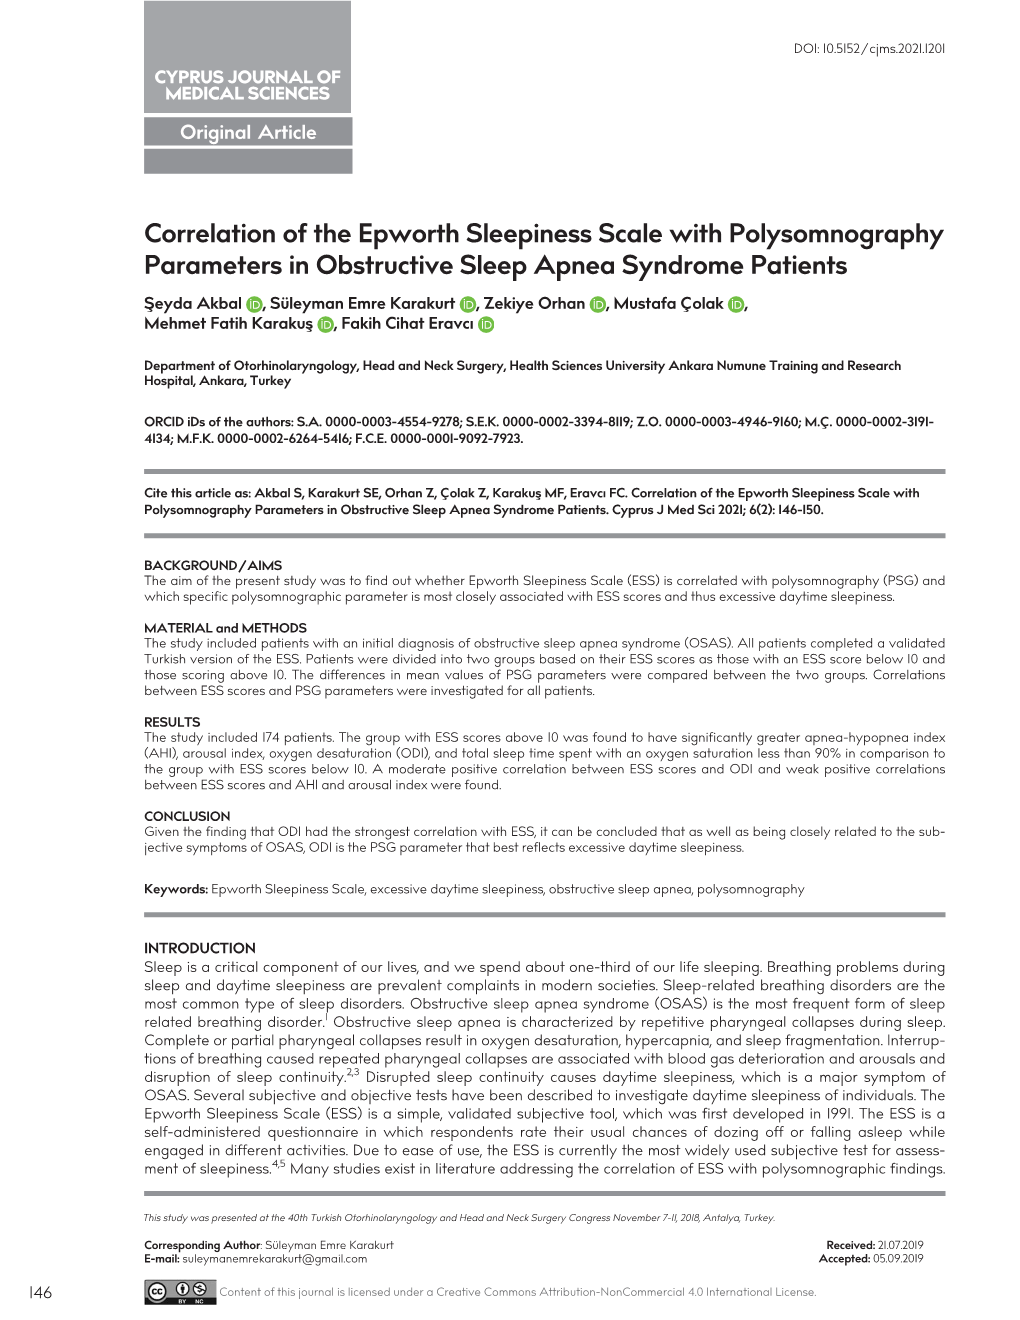 Correlation of the Epworth Sleepiness Scale with Polysomnography Parameters in Obstructive Sleep Apnea Syndrome Patients